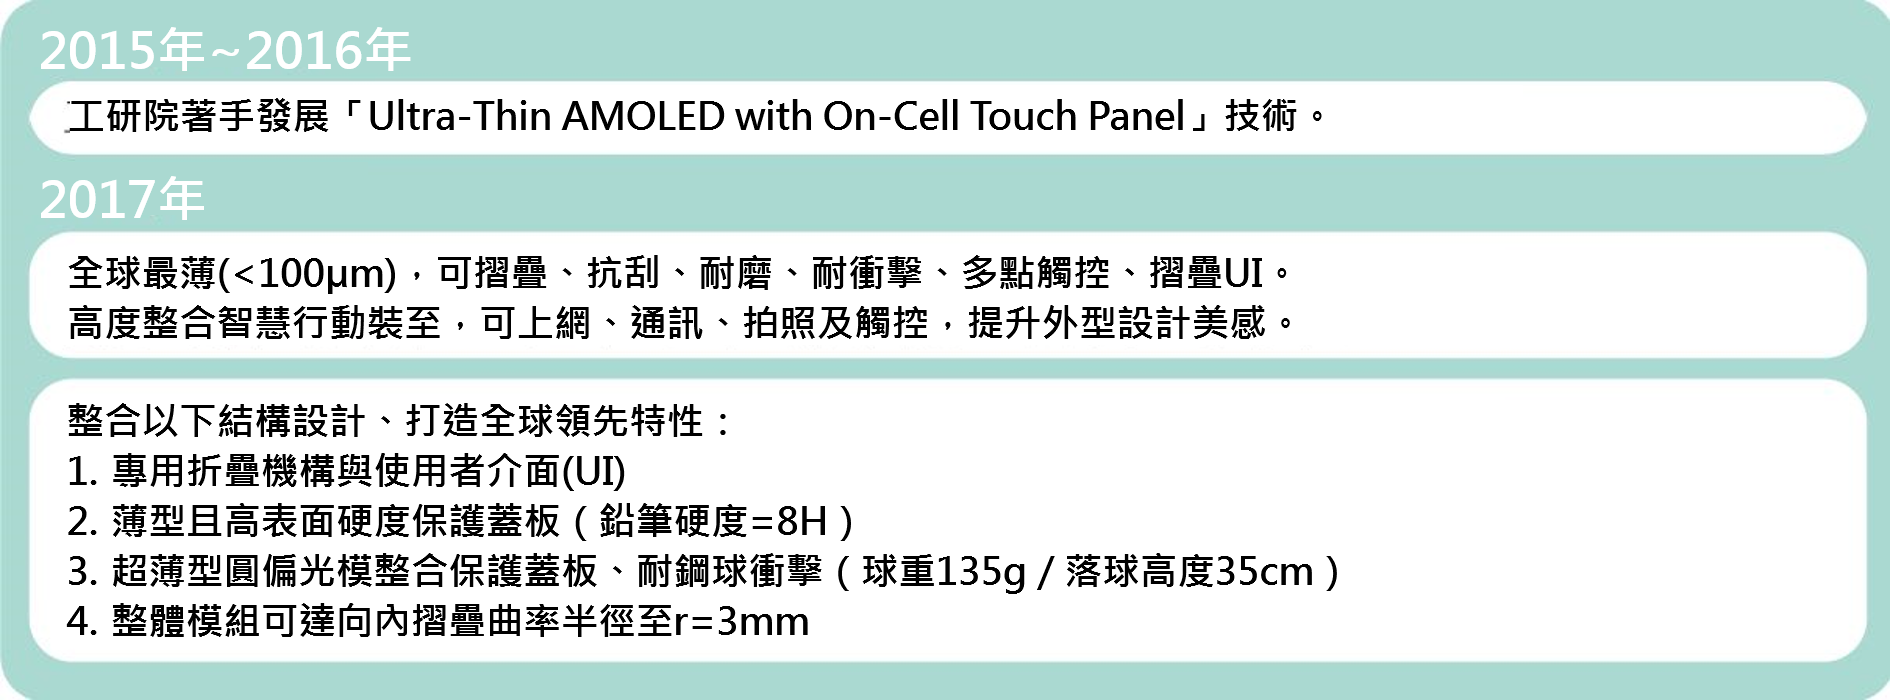 Foldable Touch AMOLED技術發展過程